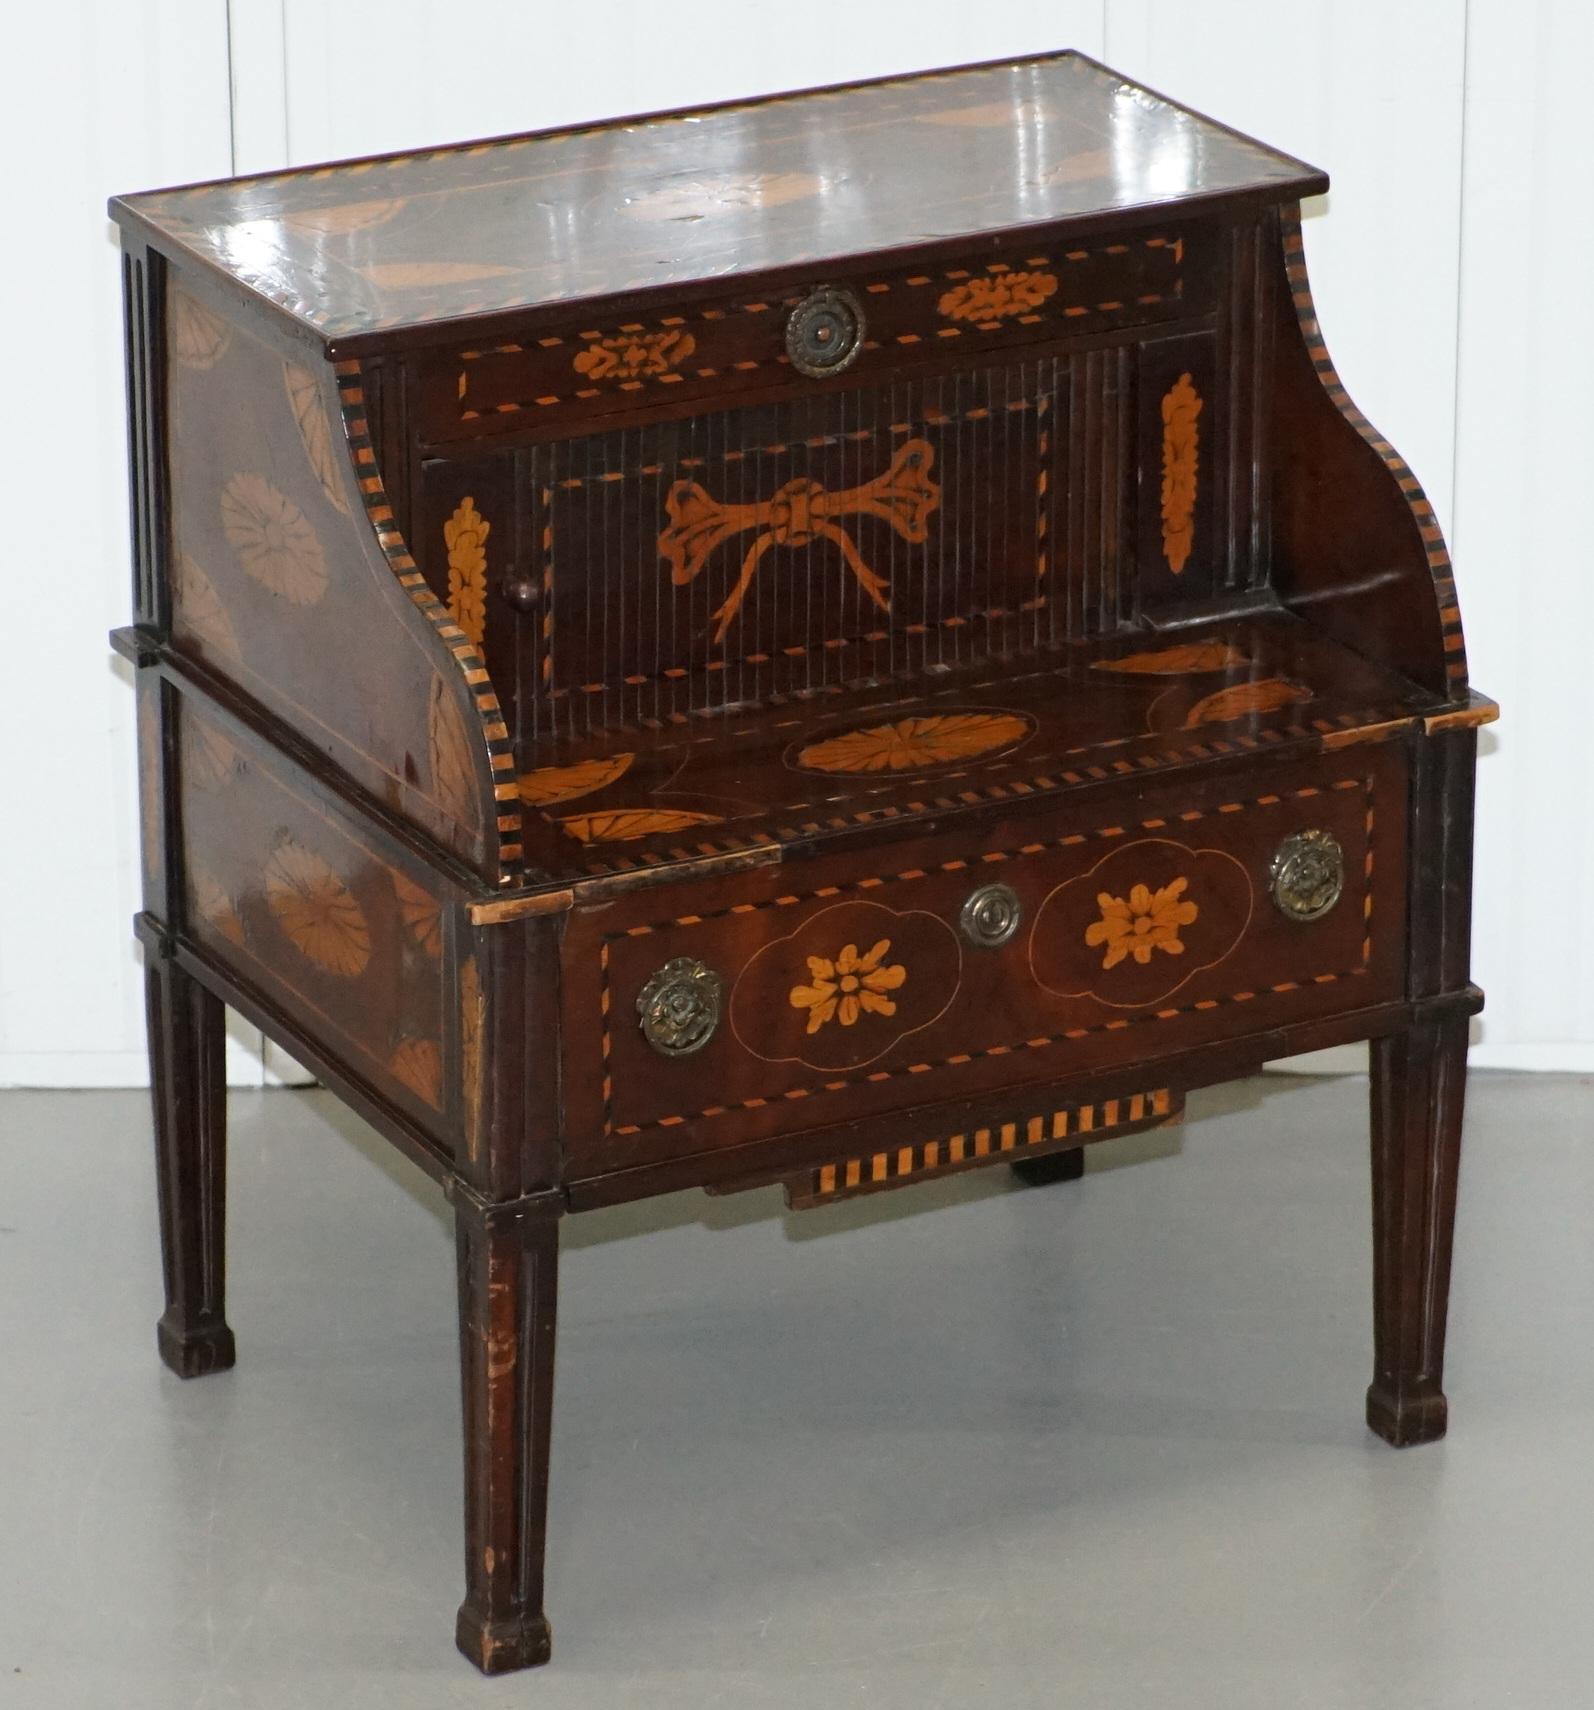 We are delighted to offer for sale this very rare tambour fronted 18th century Dutch marquetry inlaid side table

A very good looking and well made piece, hard to believe its nearly 240 years old! The timber patina is glorious, it looks sublime